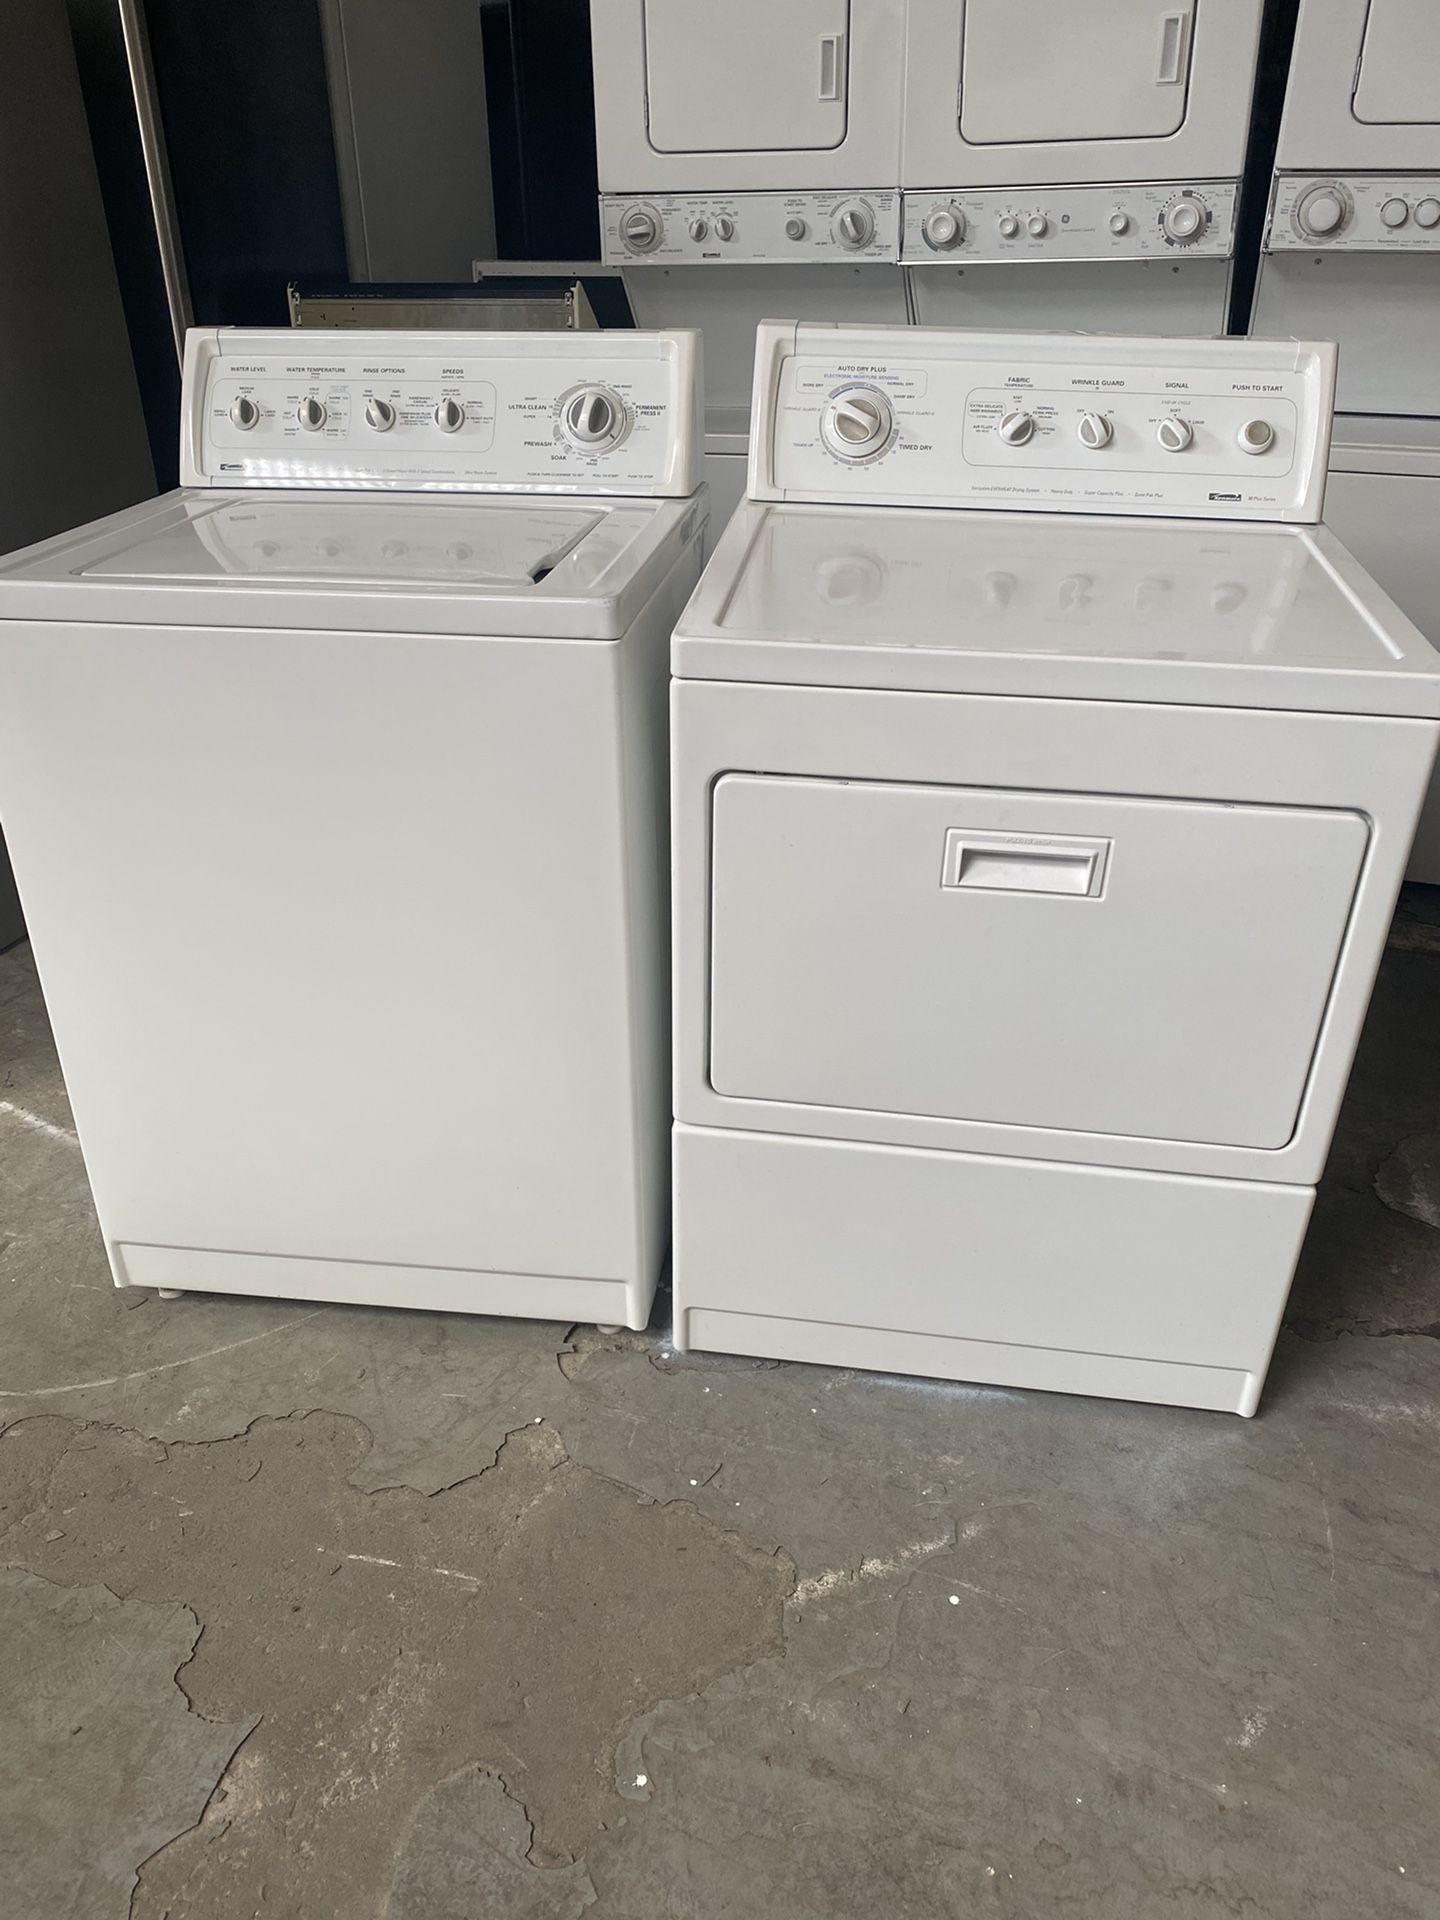 Set washer and dryer Kenmore good condition 90 days warranty the dryer is gas